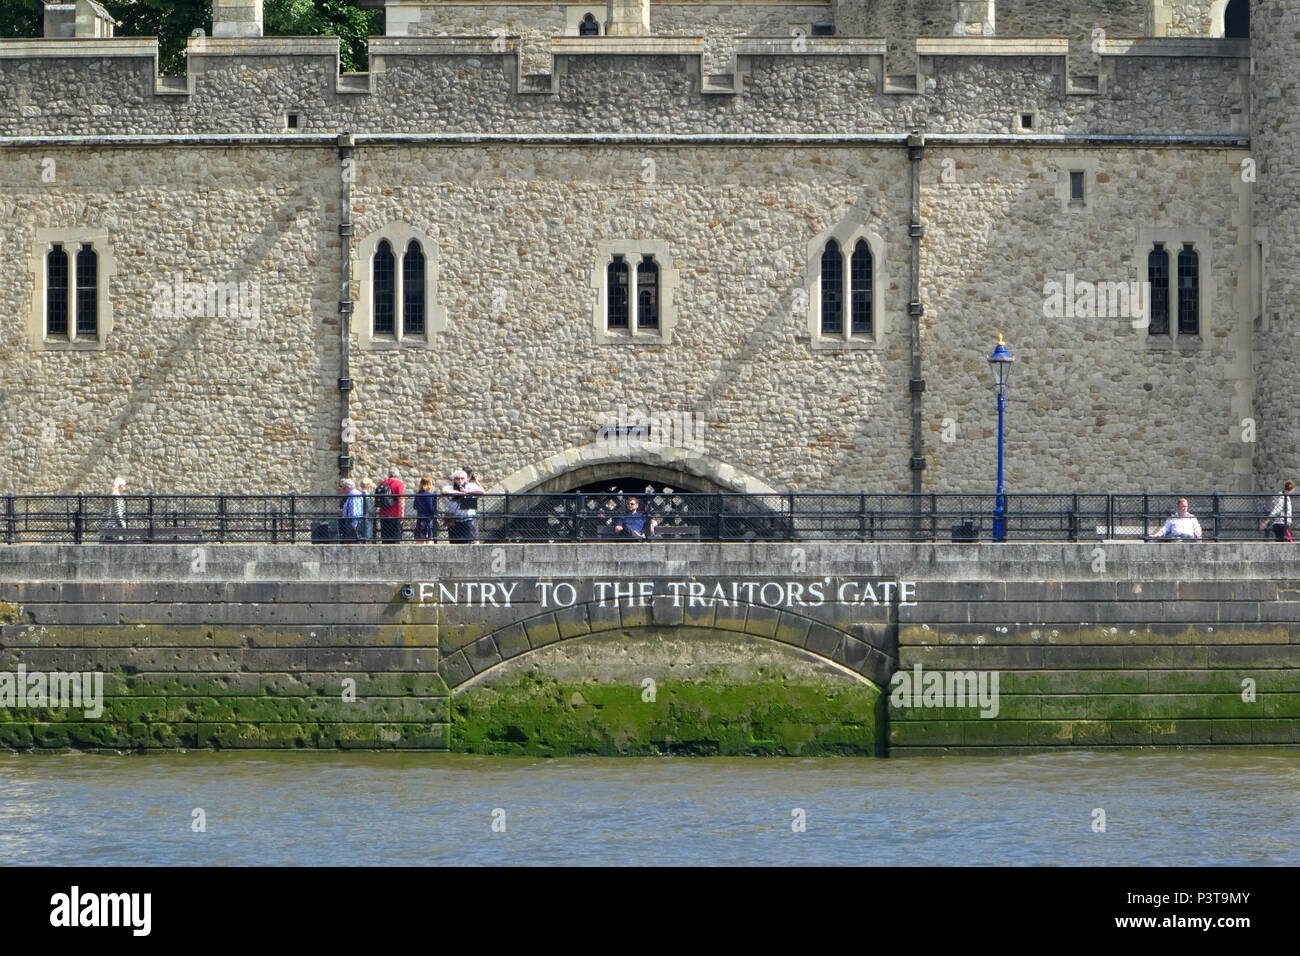 Entry to the Traitors' Gate, Tower of London, London, UK, seen from the river Thames Stock Photo